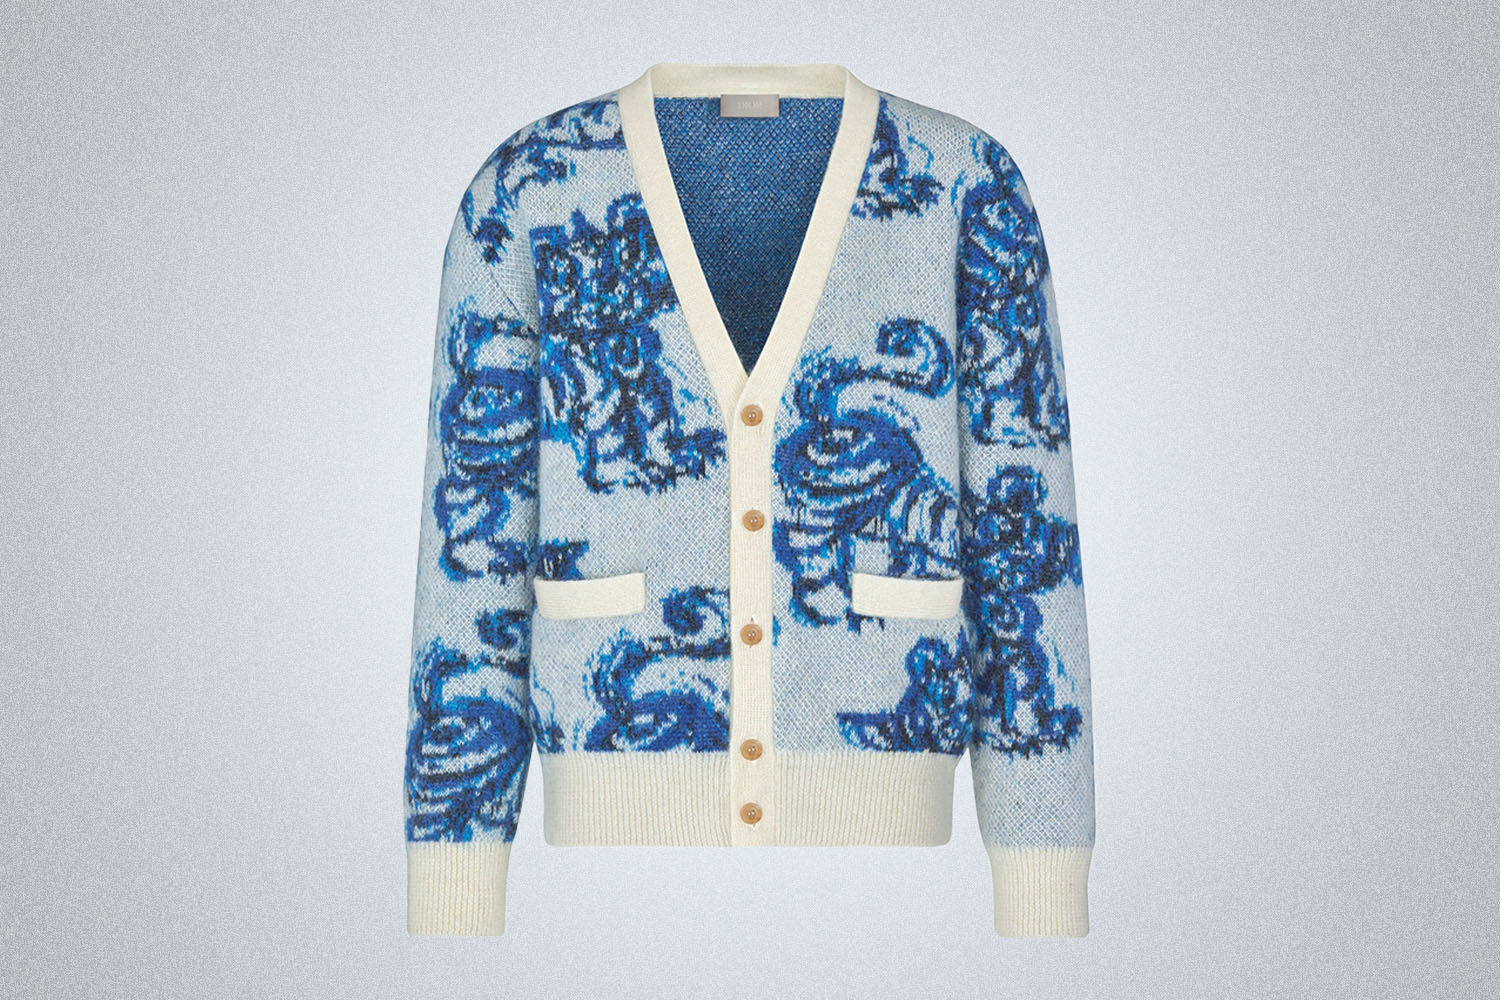 a blue and white printed cardigan with tiger graphics